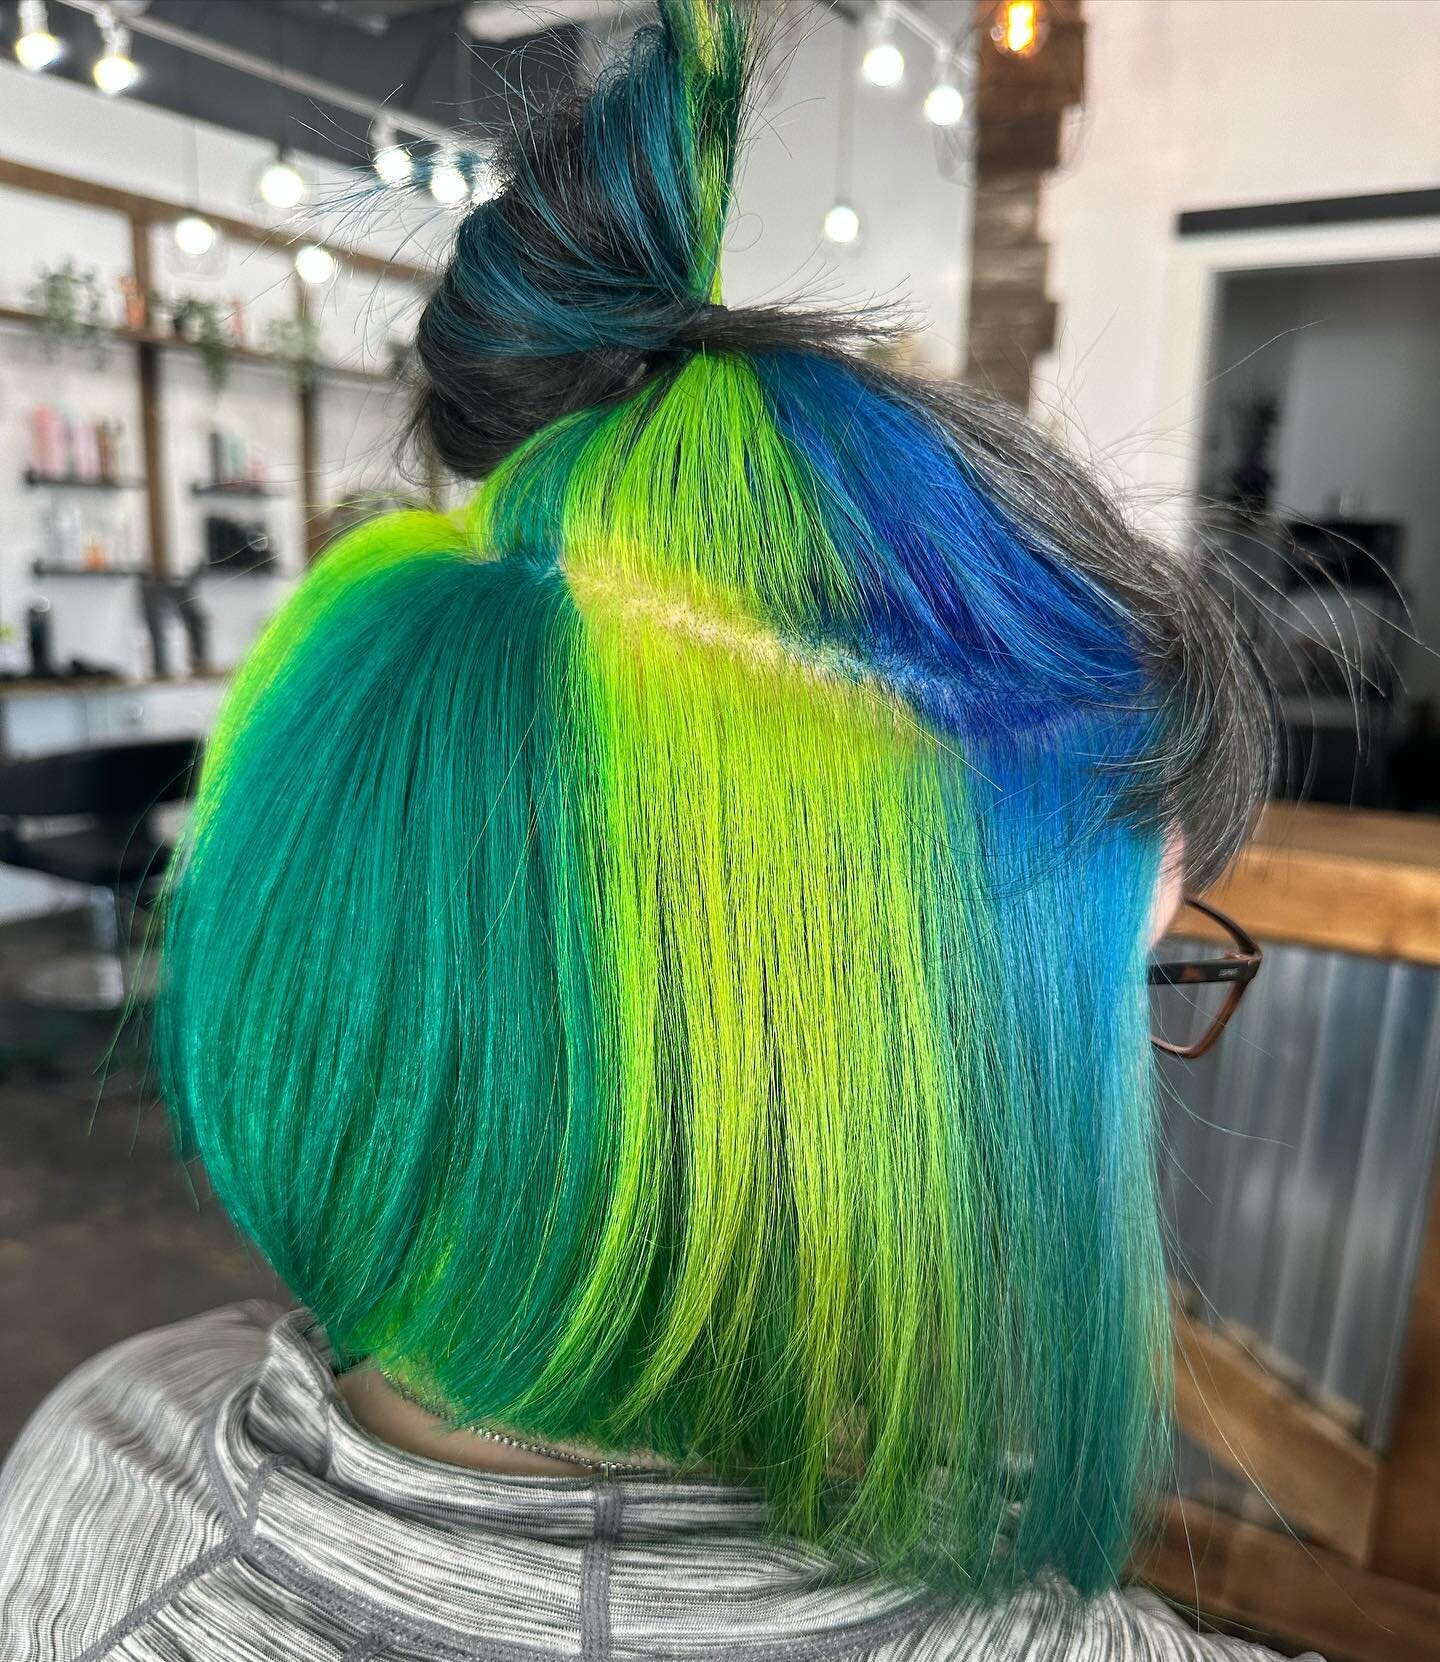 A C I D S P I L L 
I&rsquo;m legit addicted to @pulpriothair new #wildride collection and acid spill is at the top of that list!! So when @_feralgremlin came in today saying she wanted greens and blues I was extra stoked!! 
Also, this has to be one o